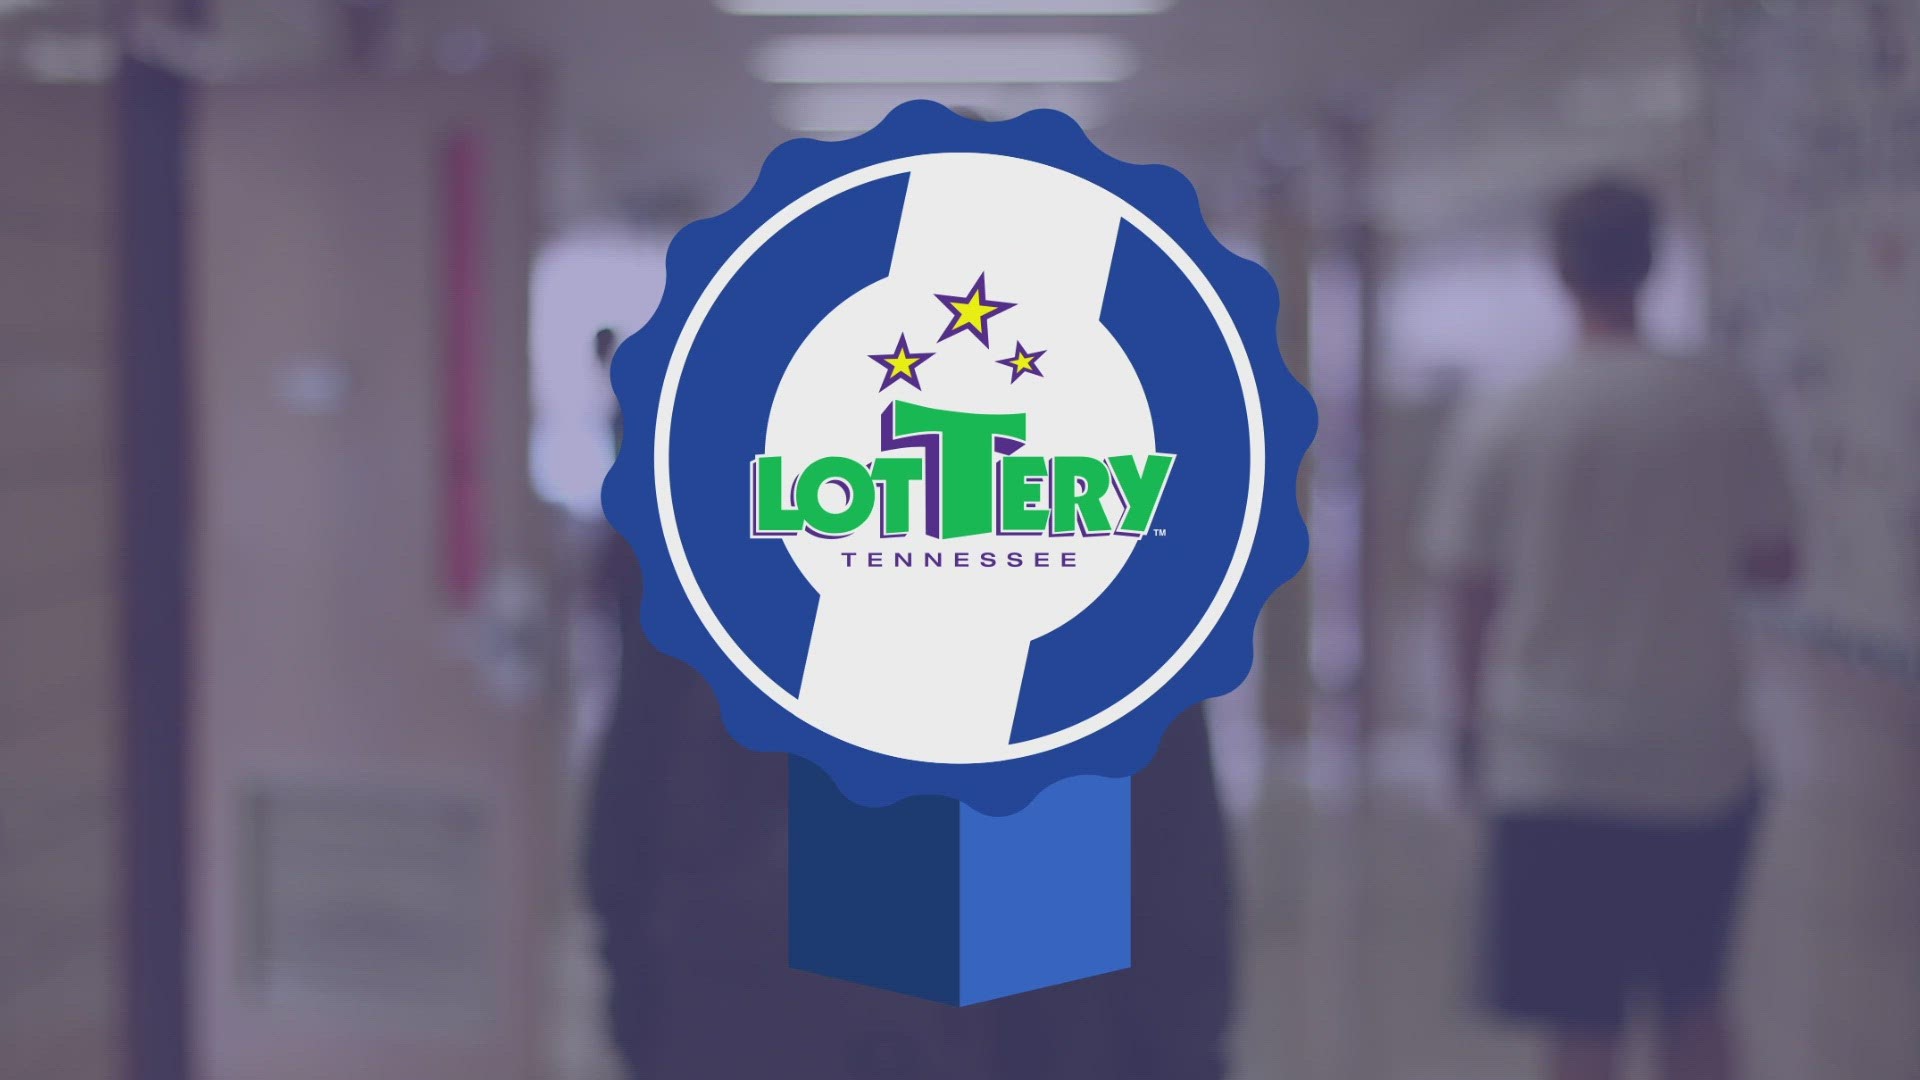 Channel 10, in partnership with the Tennessee Lottery, recognizes educators